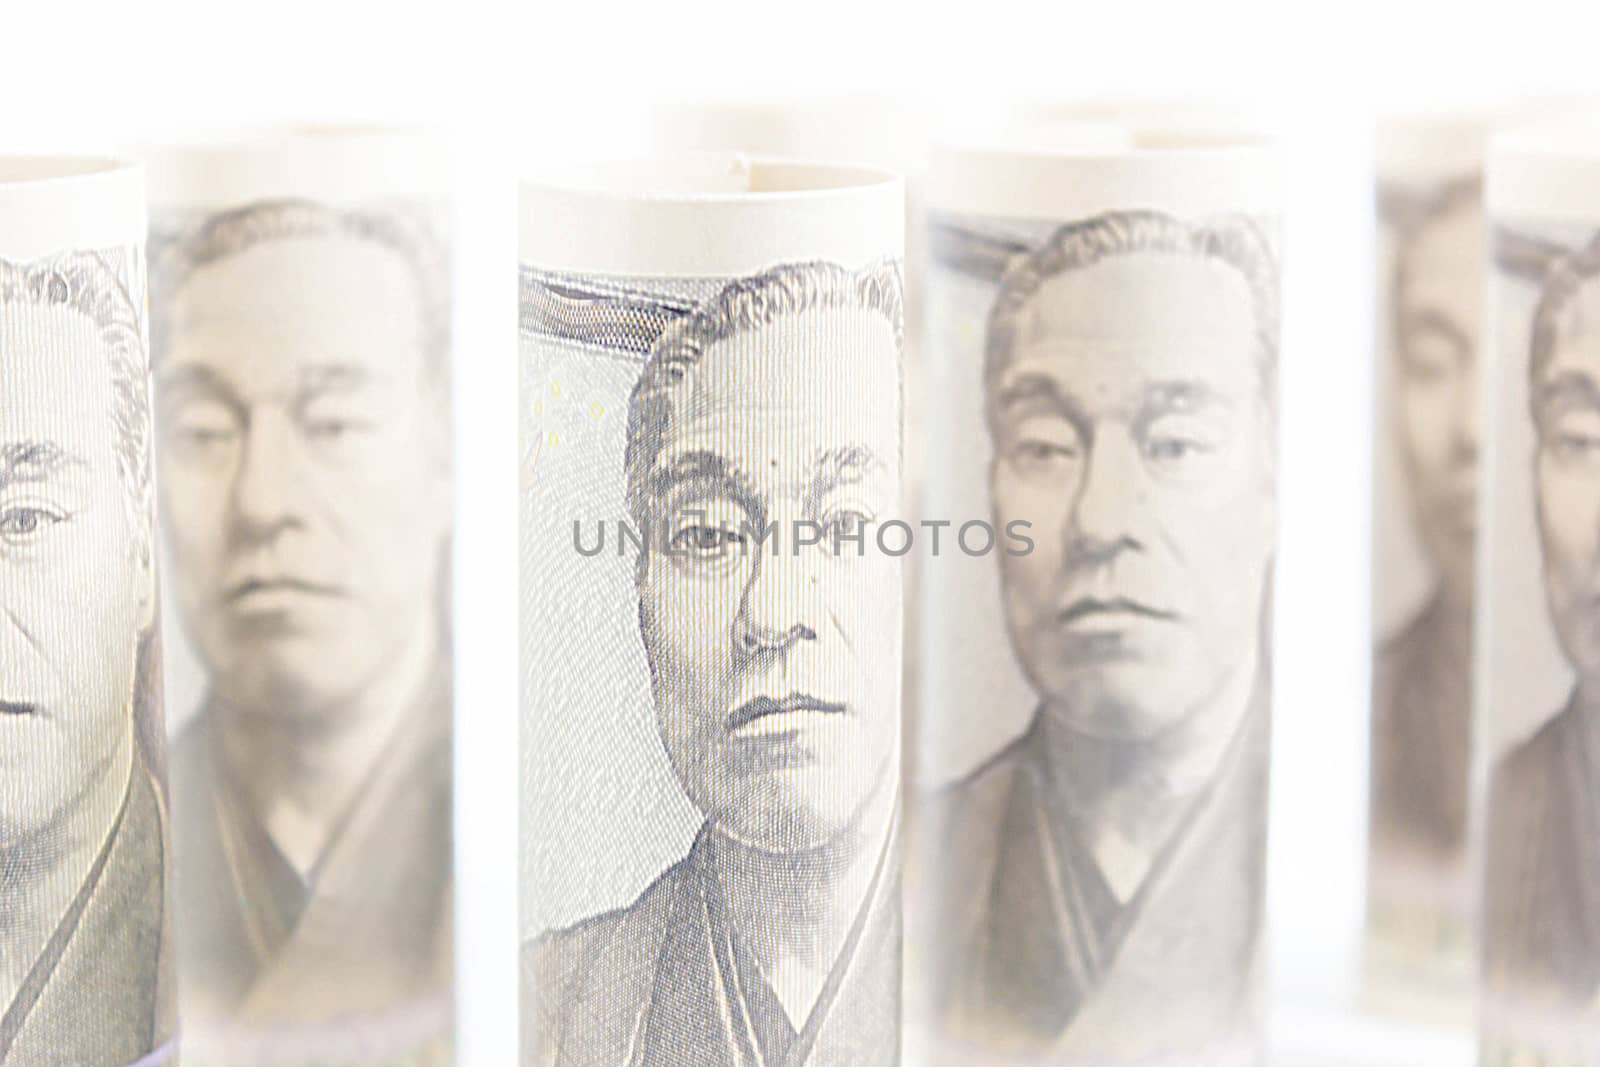 Roll Up Of Money Yen Banknote On Vintage Wooden Background, Business And Finance Concepts, Banknotes Stacked On Each Other In Different Positions